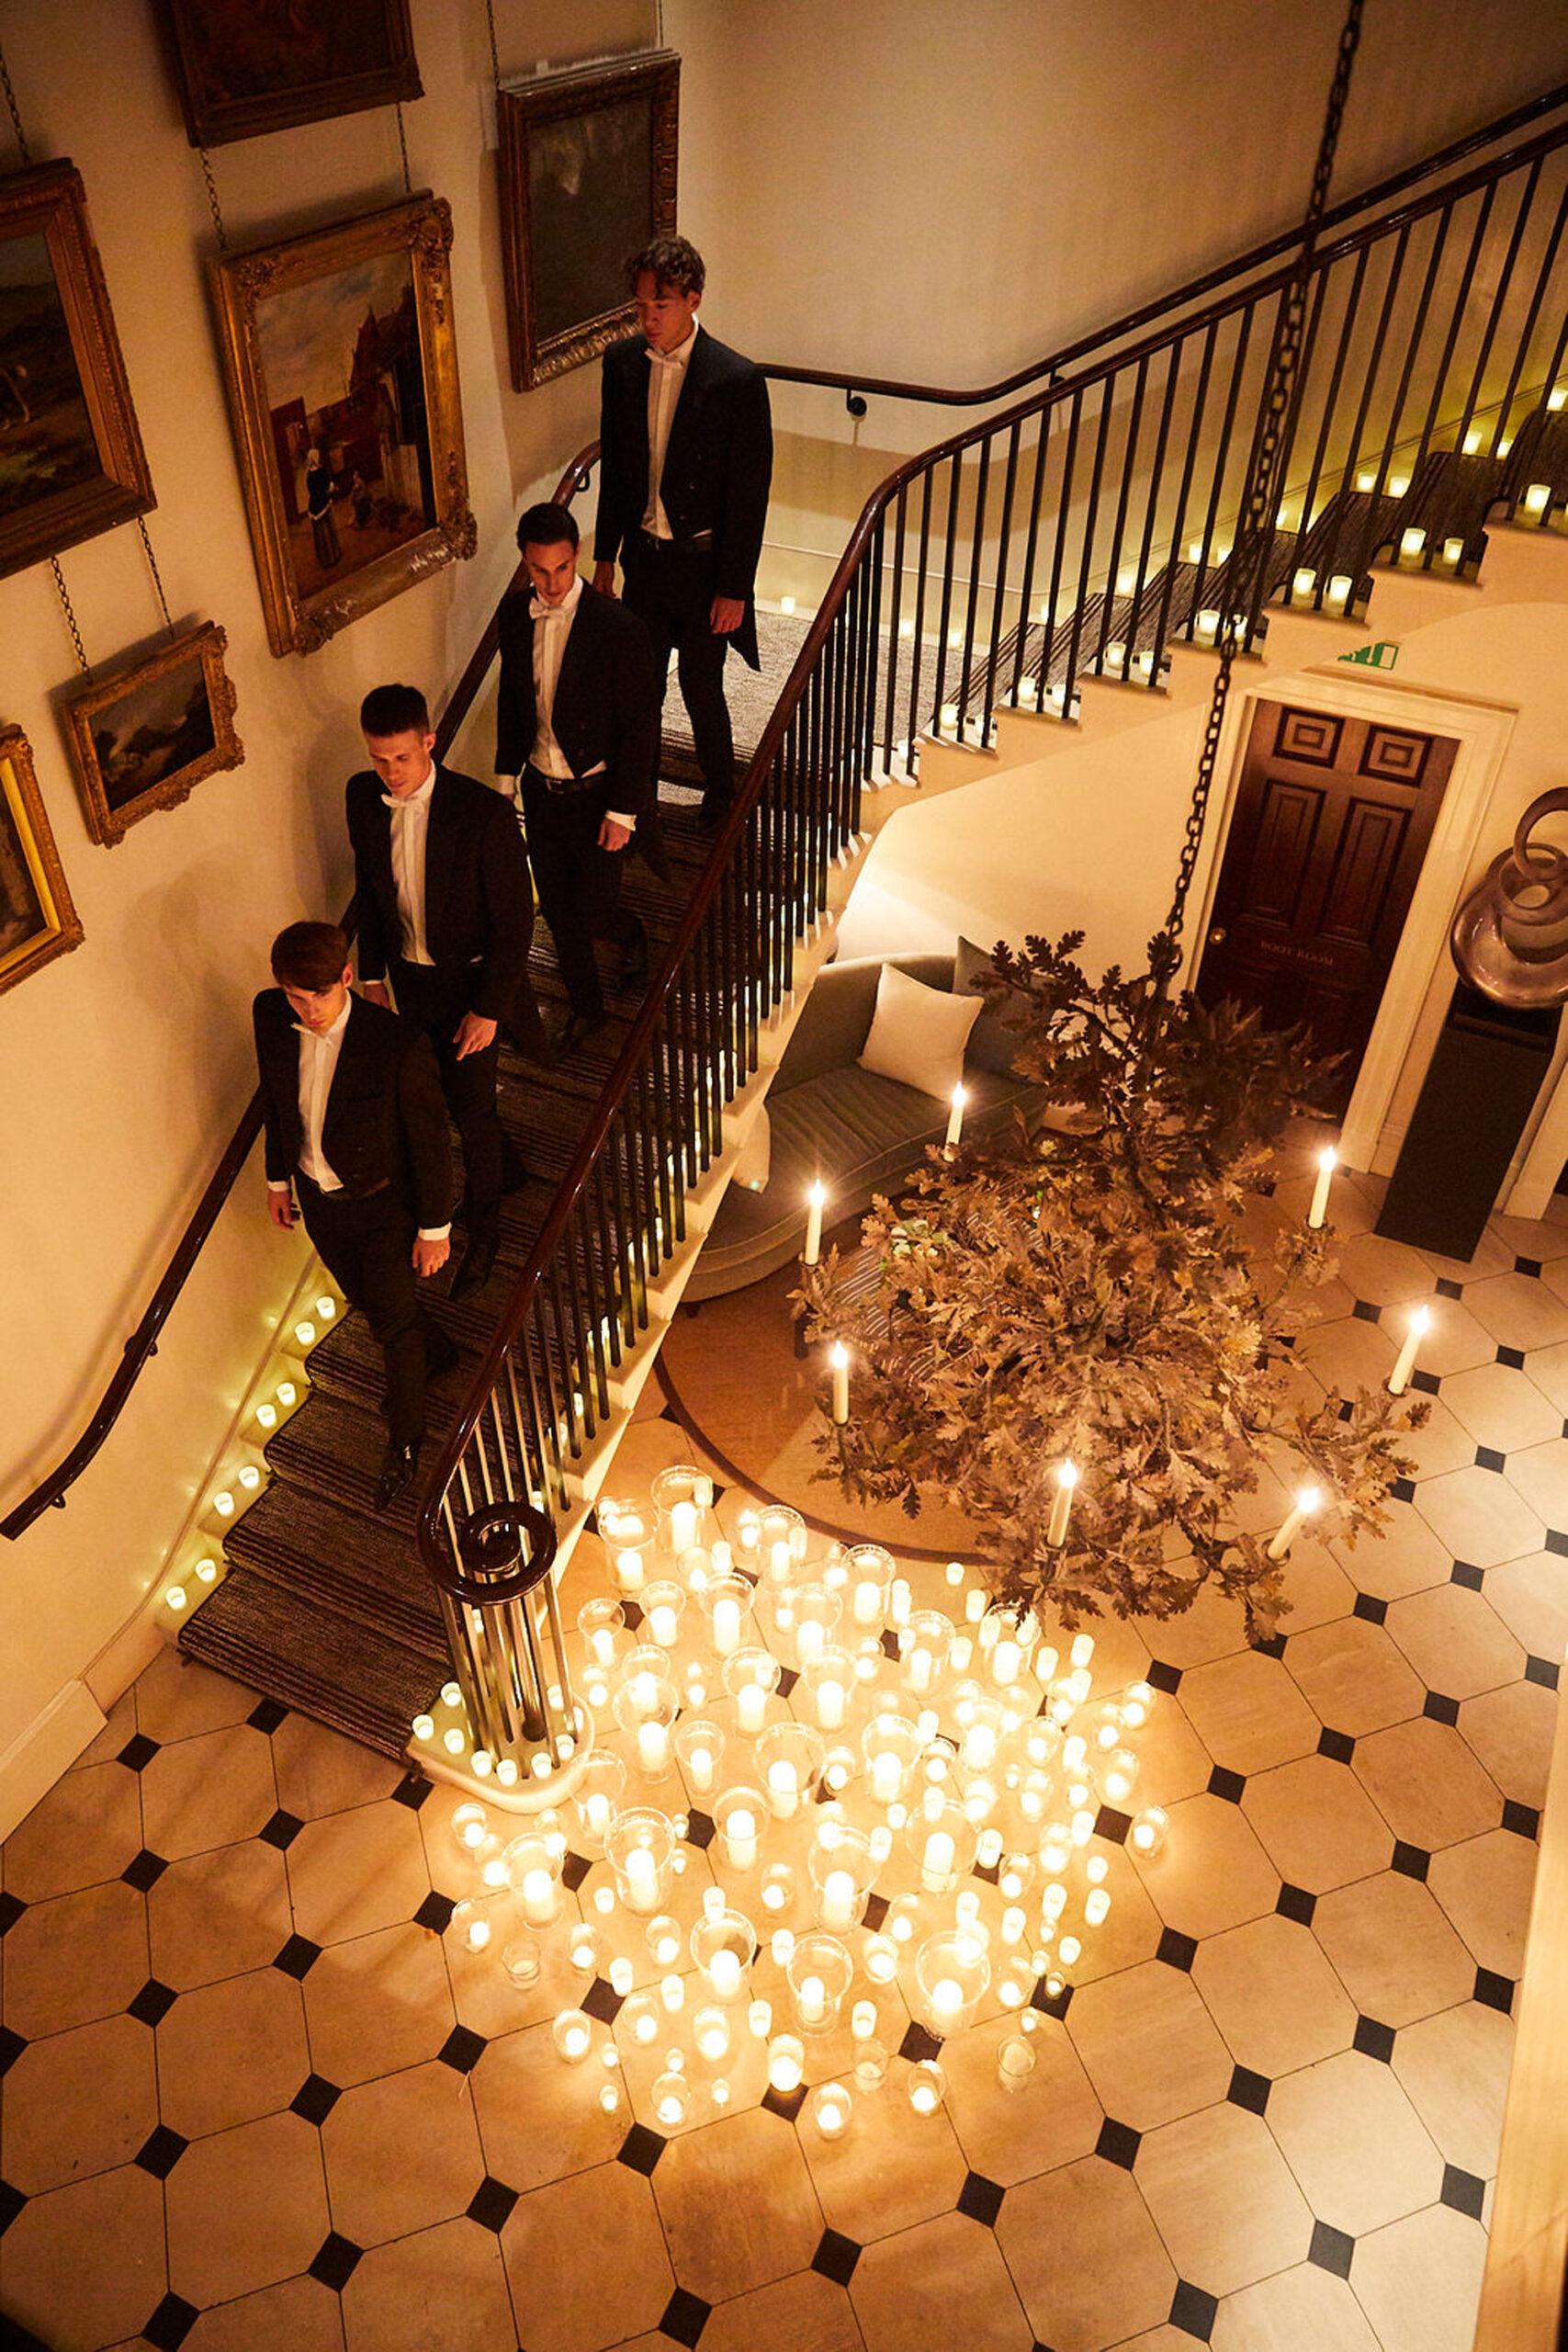 Looking down onto a grand staircase in a luxury venue, with Niemierko hosts walking down the stairs in suits, and hundreds of candles on the floor below making a beautiful display